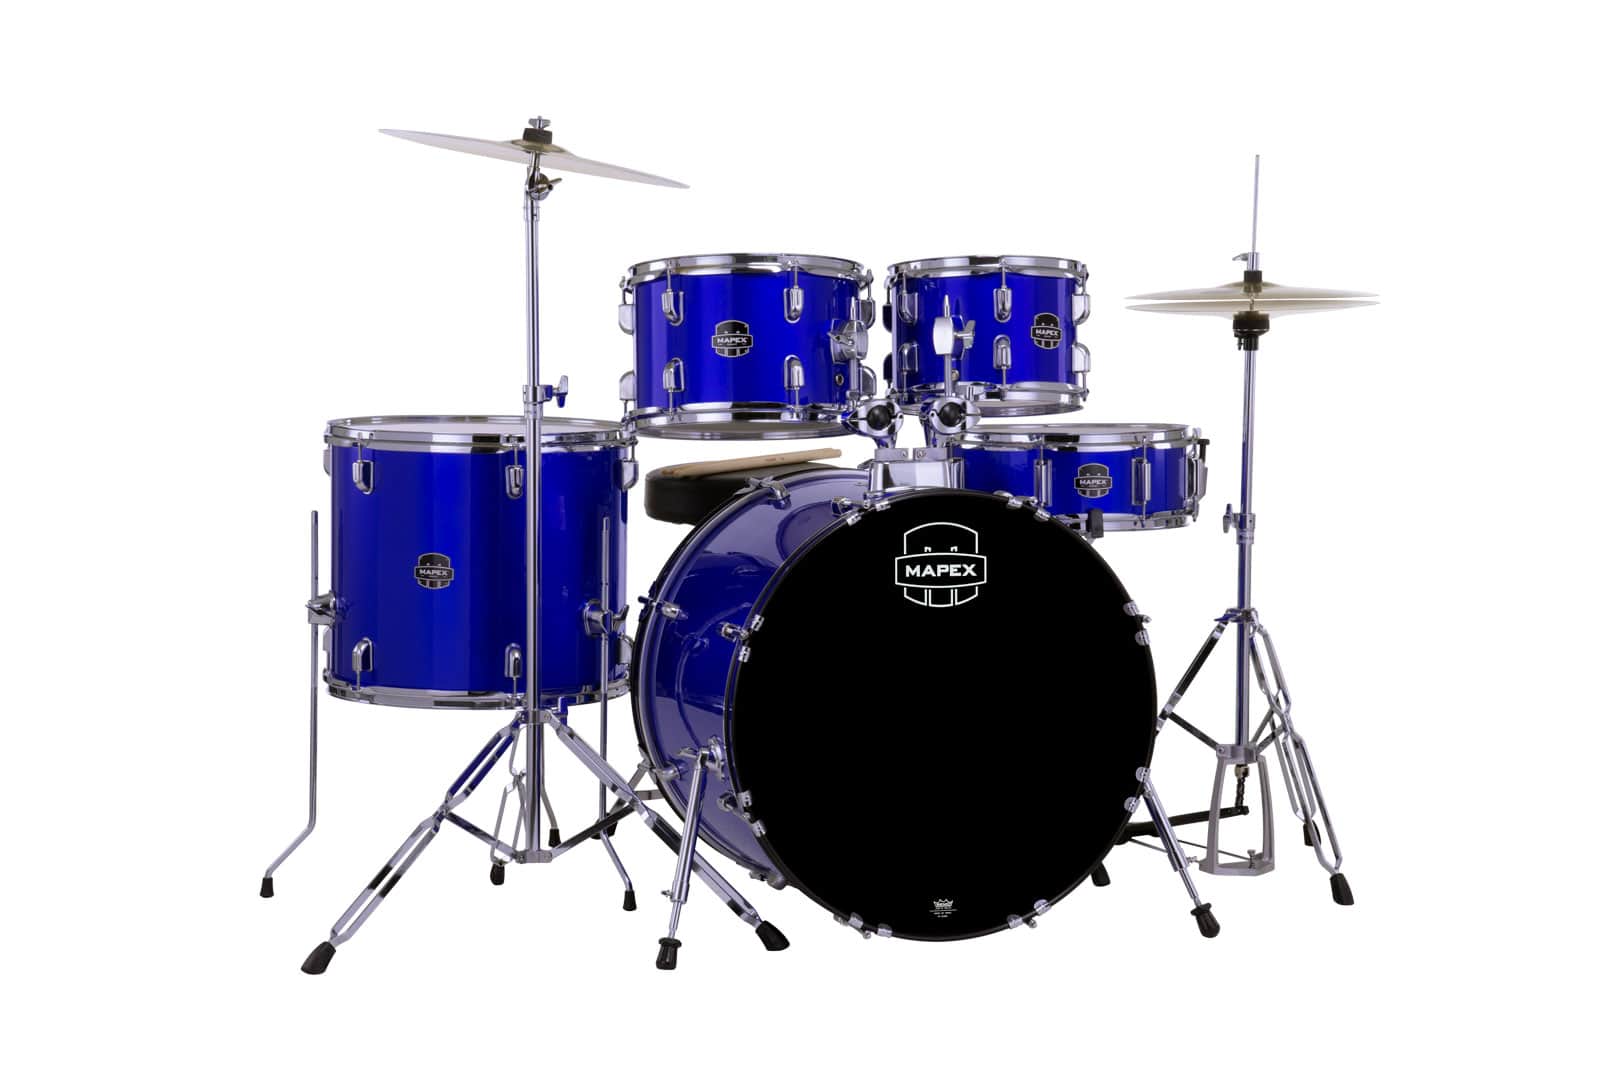 MAPEX COMET STAGE 22